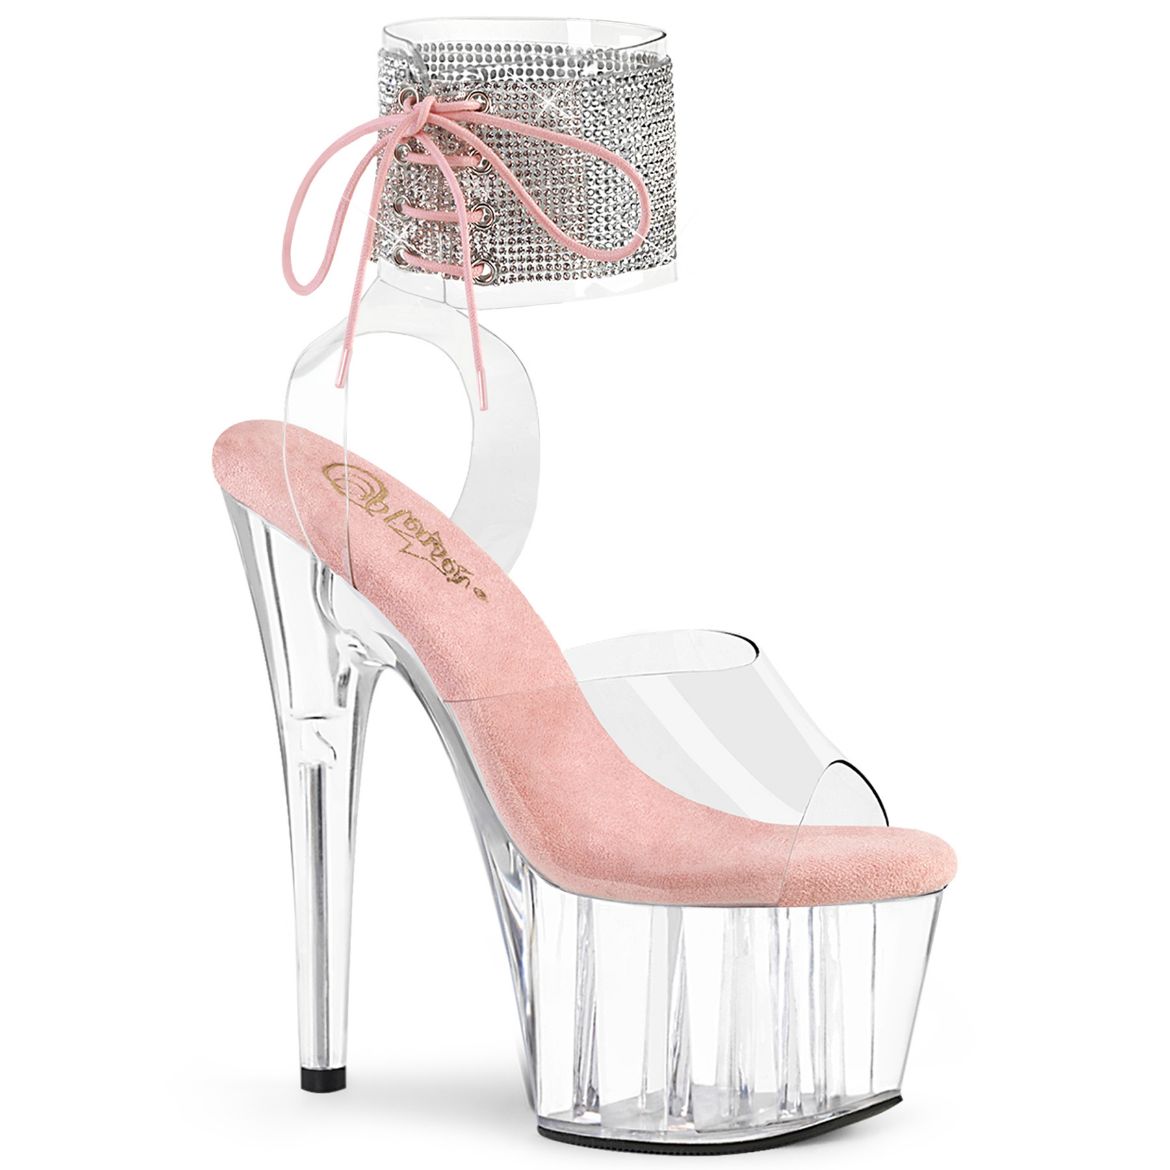 Product image of Pleaser ADORE-791-2RS Clr-B. Pink/Clr 7 Inch Heel 2 3/4 Inch PF Rhinestoned Ankle Cuff Sandal